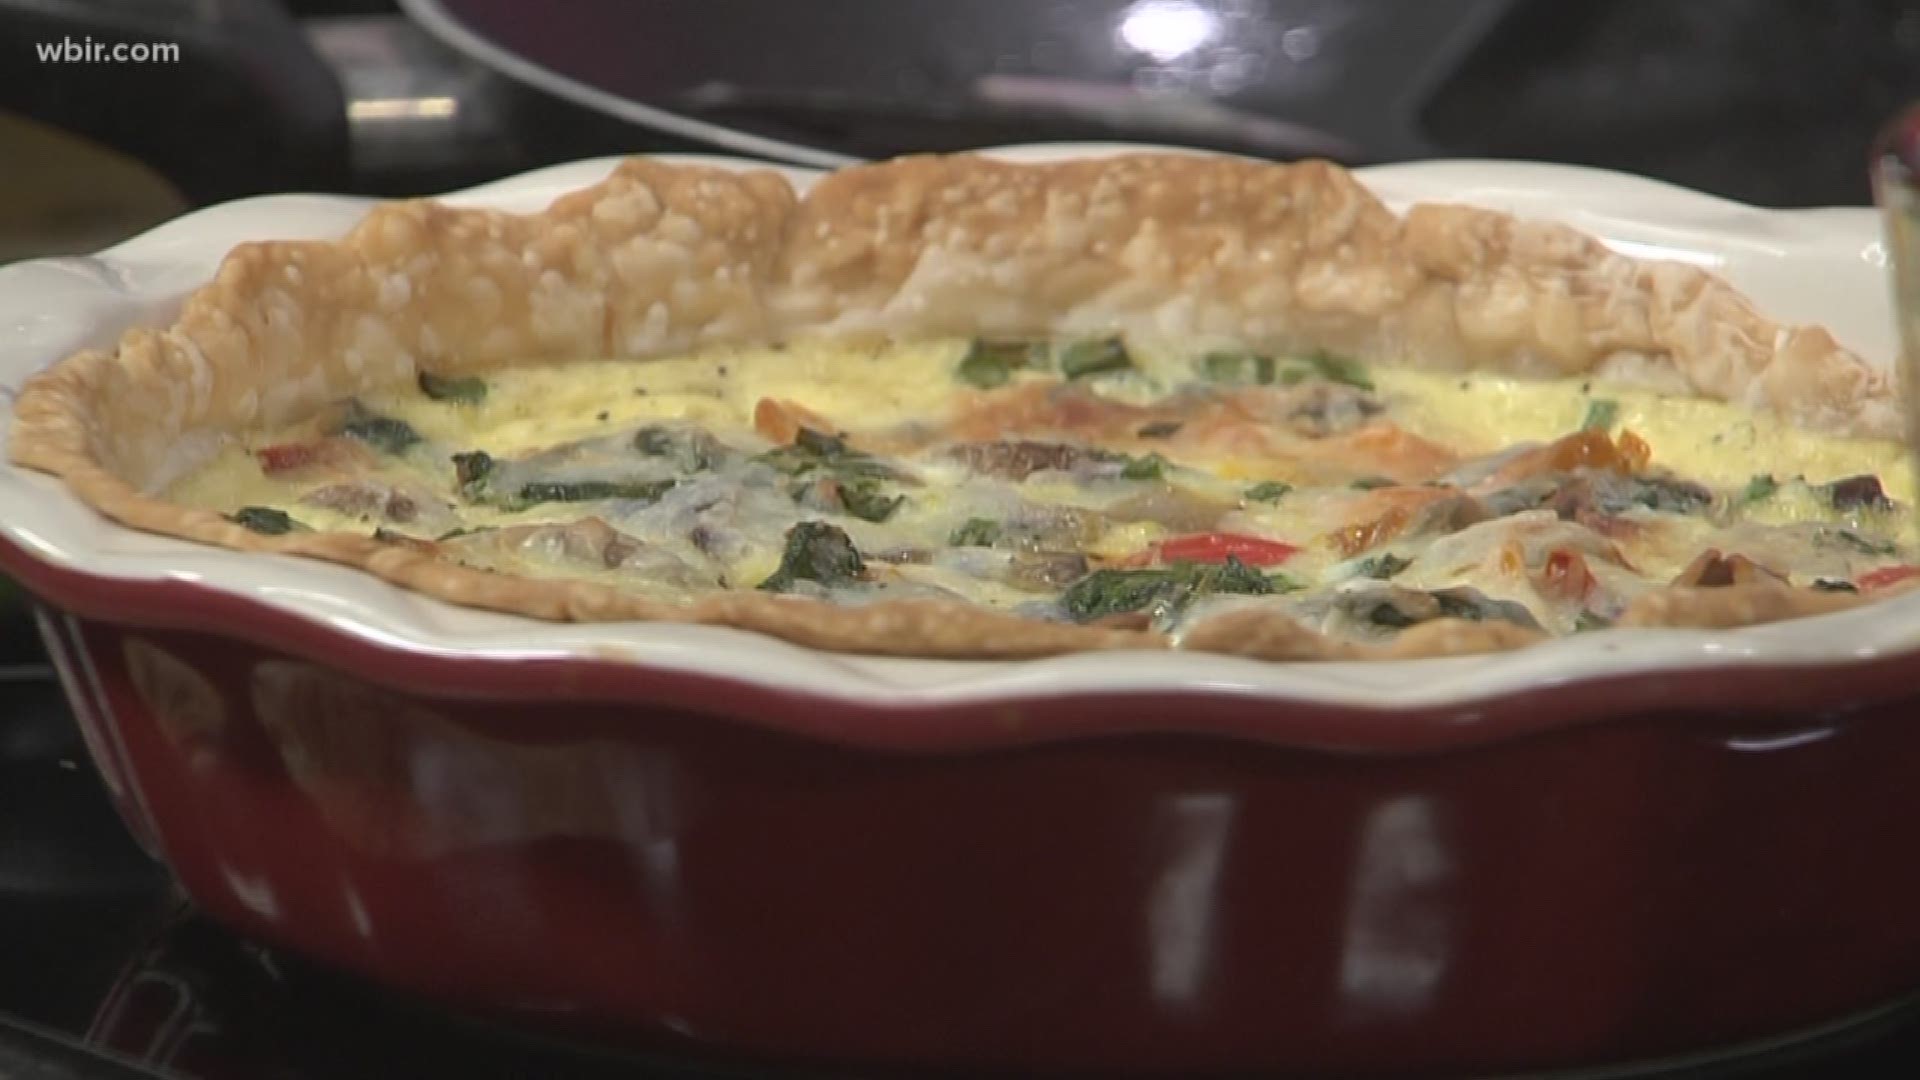 This quiche is the perfect springtime meal to make with your family.